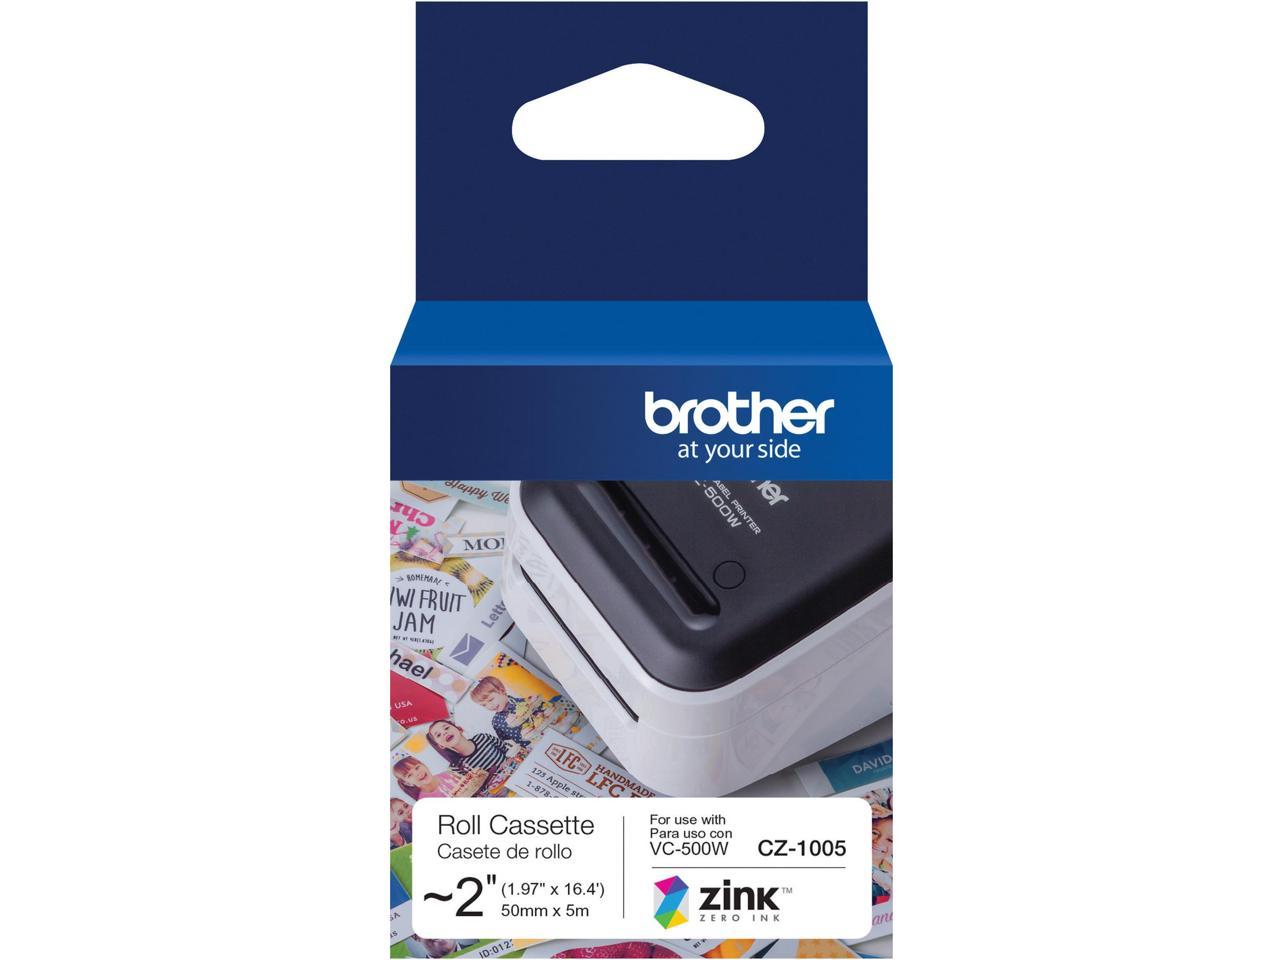 Brother Genuine CZ-1005 continuous length ~ 2 (1.97") 50 mm wide x 16.4 ft. (5 m) long label roll featuring ZINK® Zero Ink technology - 1 31/32" Width x 16 13/32 ft Length - Zero Ink